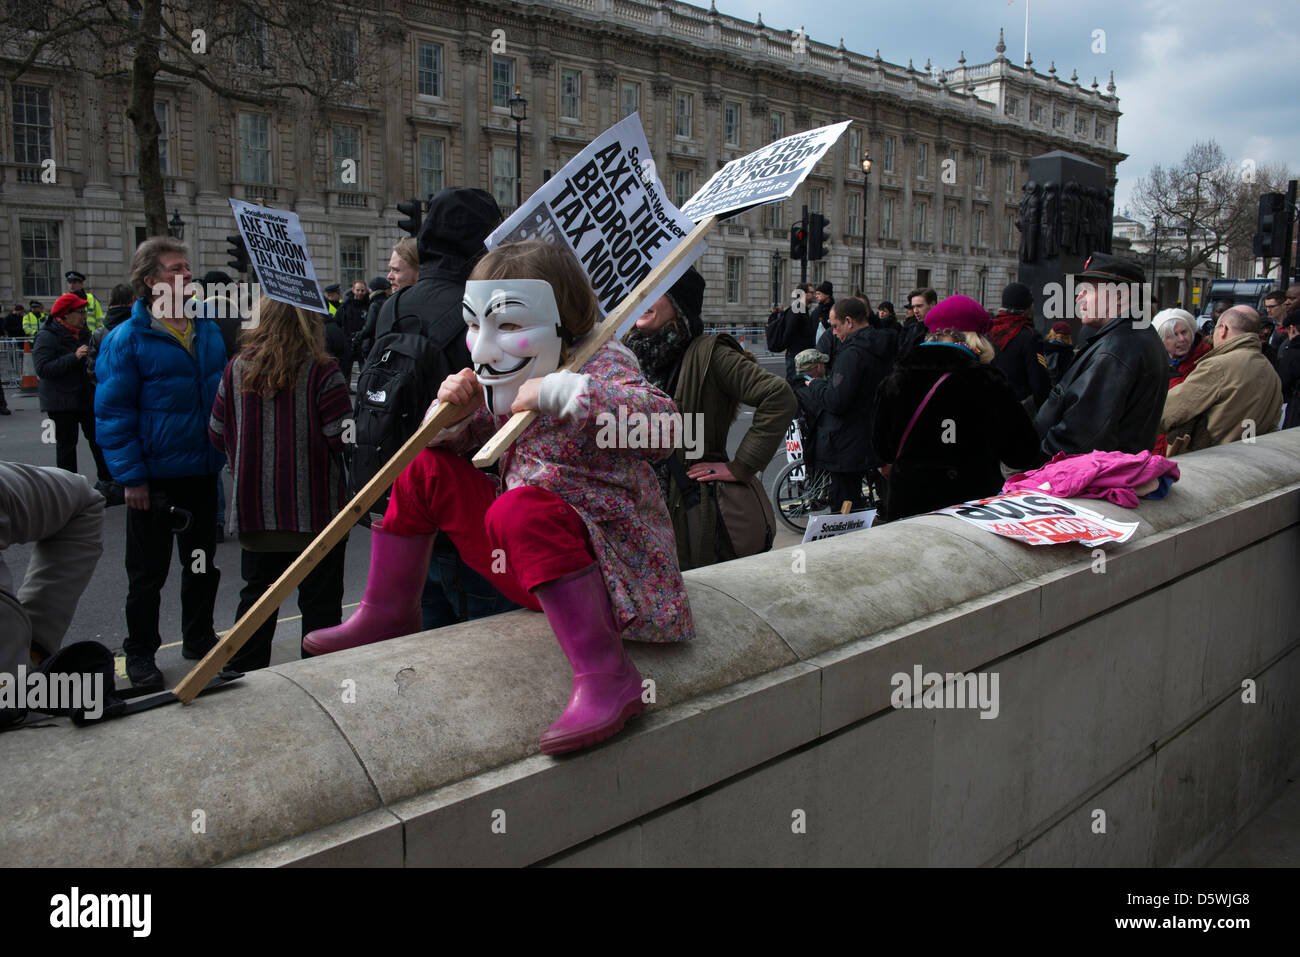 Protesters gather at Downing Street, London on 30th March 2013, to campaign against the newly introduced Bedroom Tax. Stock Photo